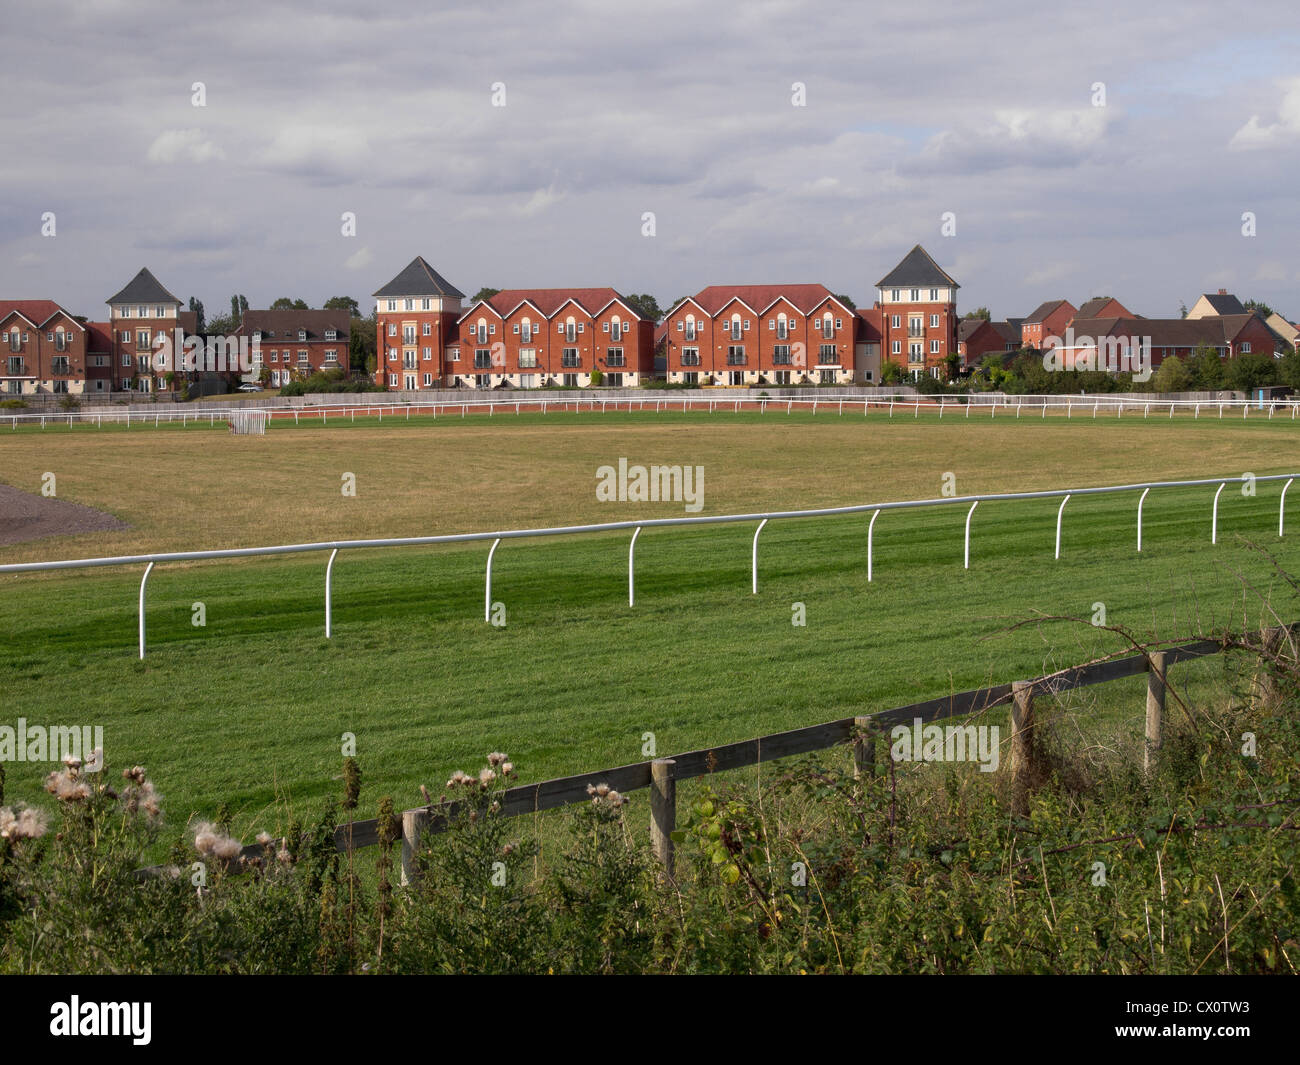 horse race track and buildings Stock Photo